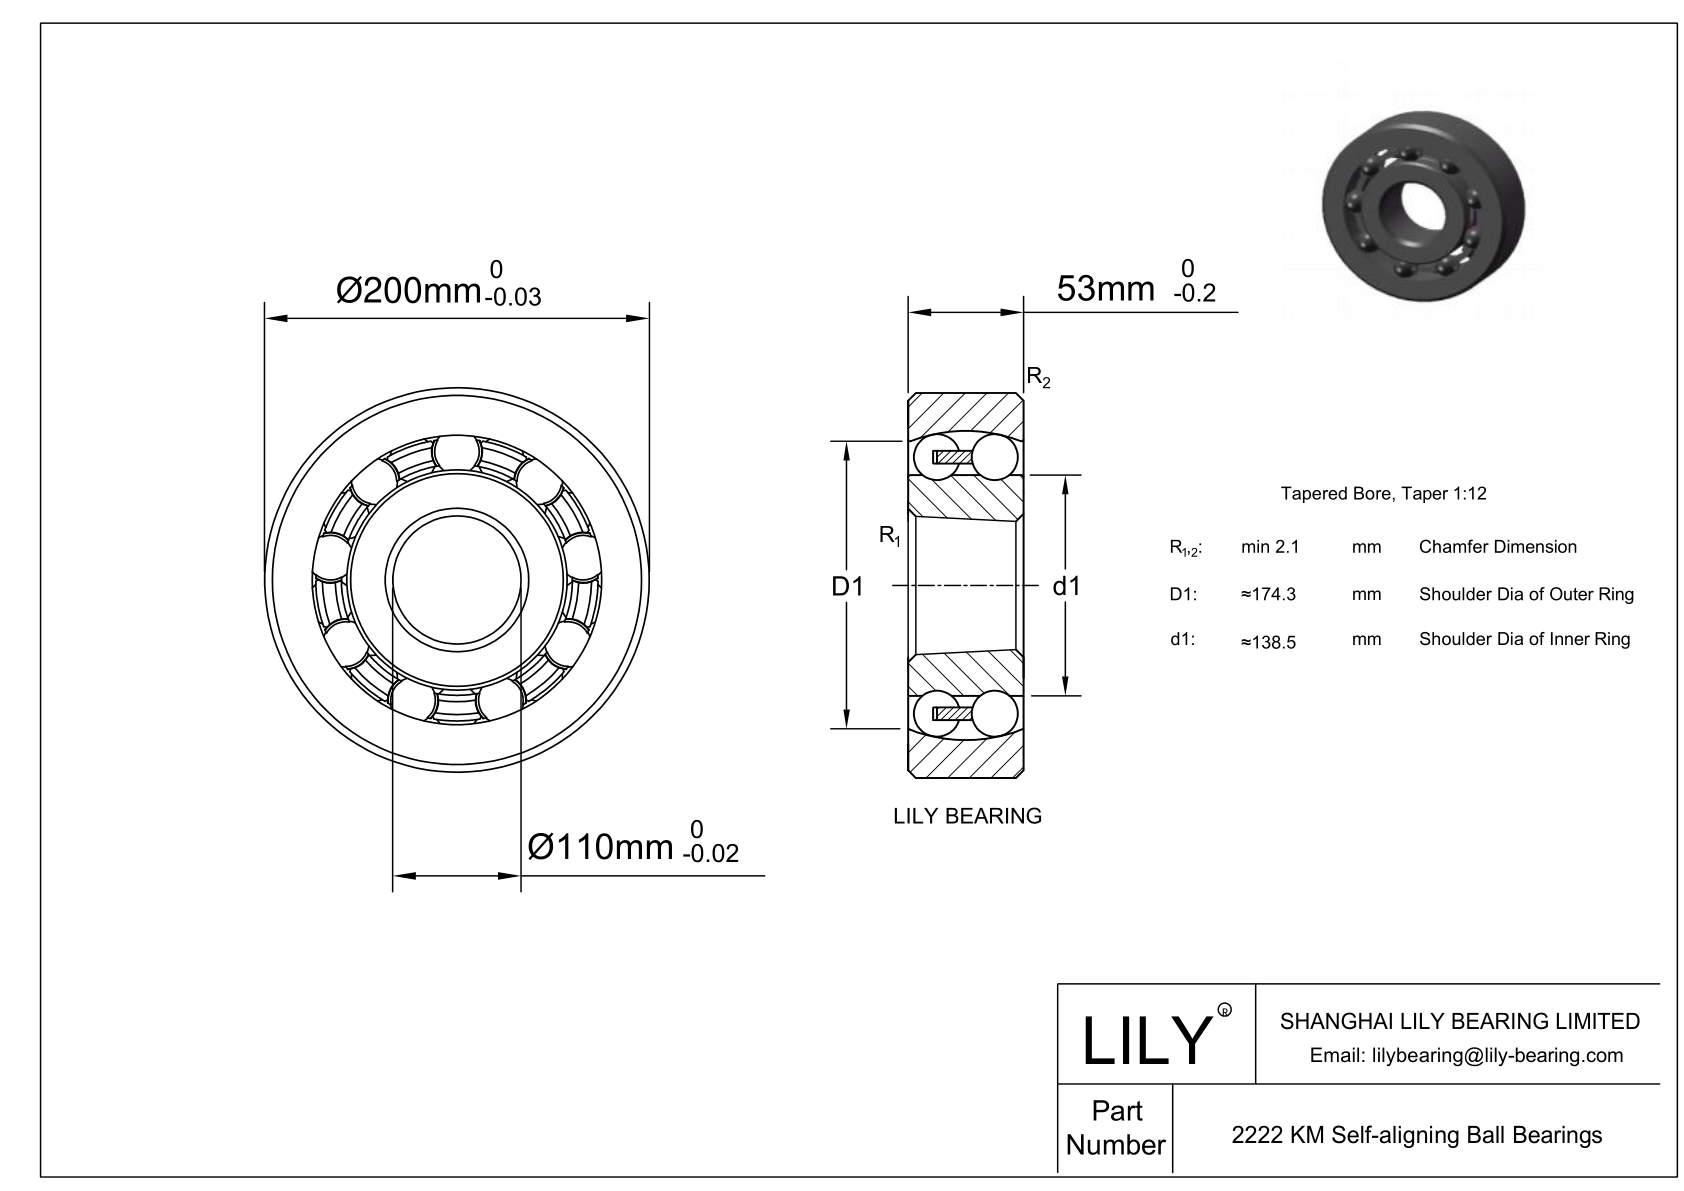 S2222 KM Stainless Steel Self Aligning Ball Bearings cad drawing